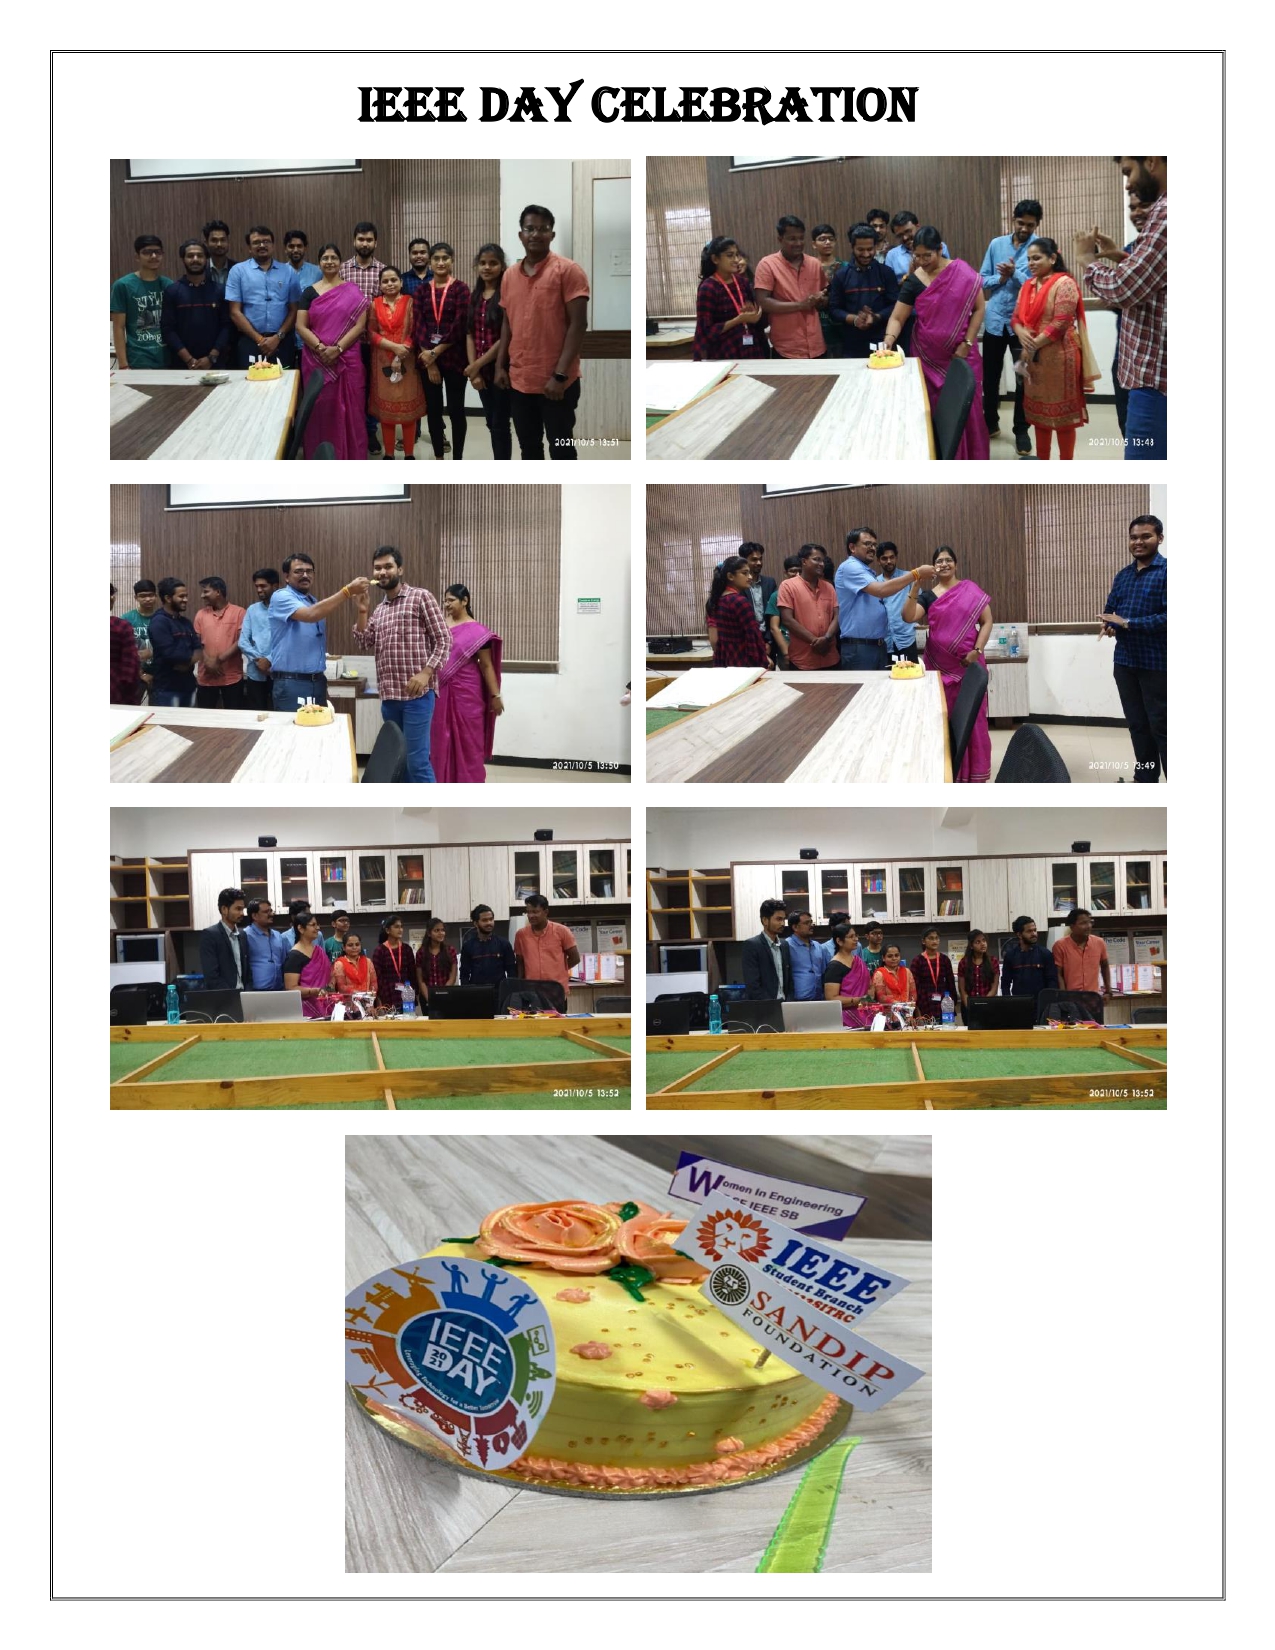 Celebration of IEEE Day